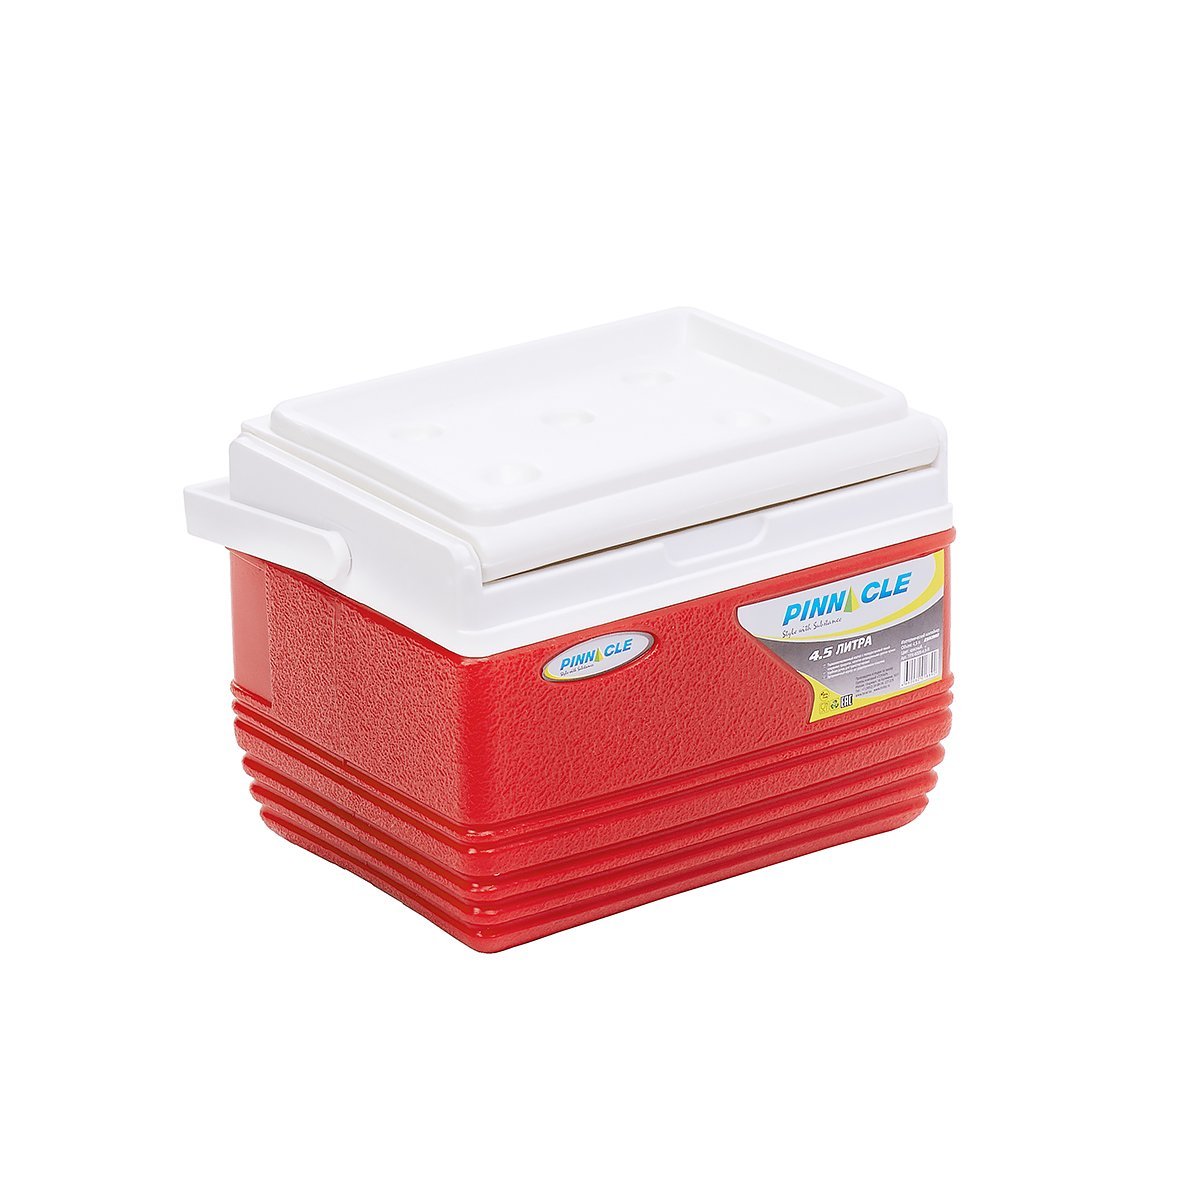 Eskimo Portable Hard-Sided Ice Chest for Camping, 4 qt, Red